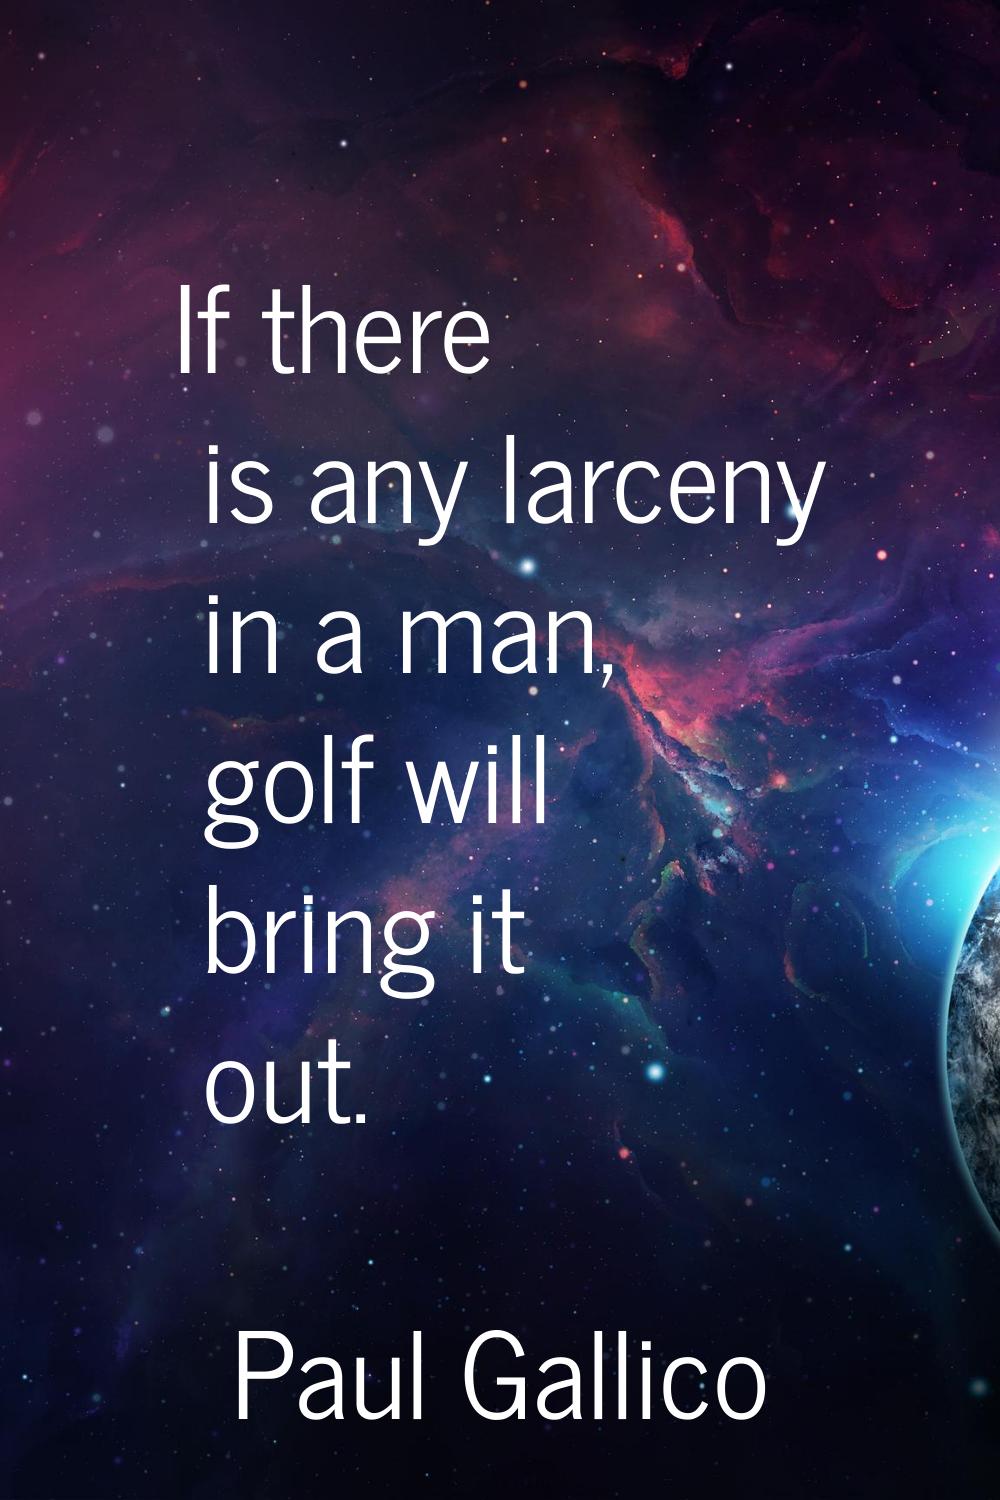 If there is any larceny in a man, golf will bring it out.